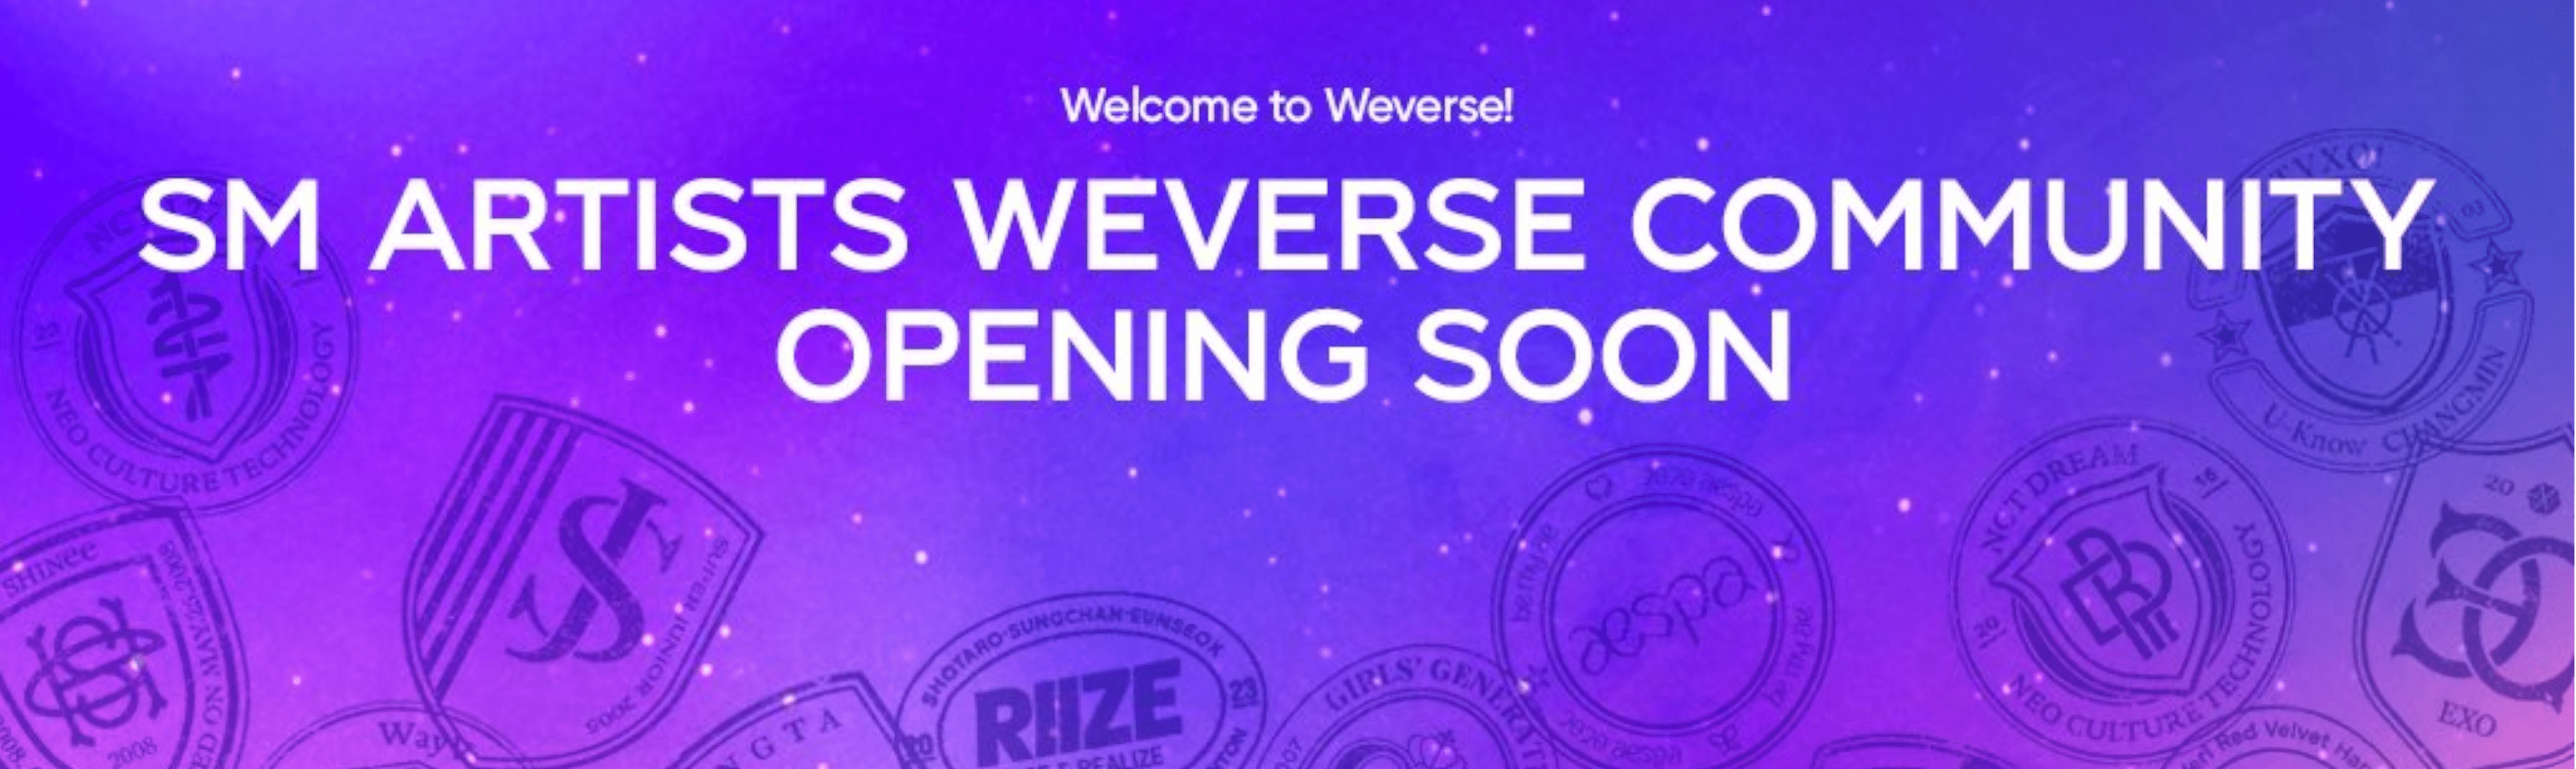 SM ARTISTS WEVERSE COMMUNITY OPENING SOON - POSTER